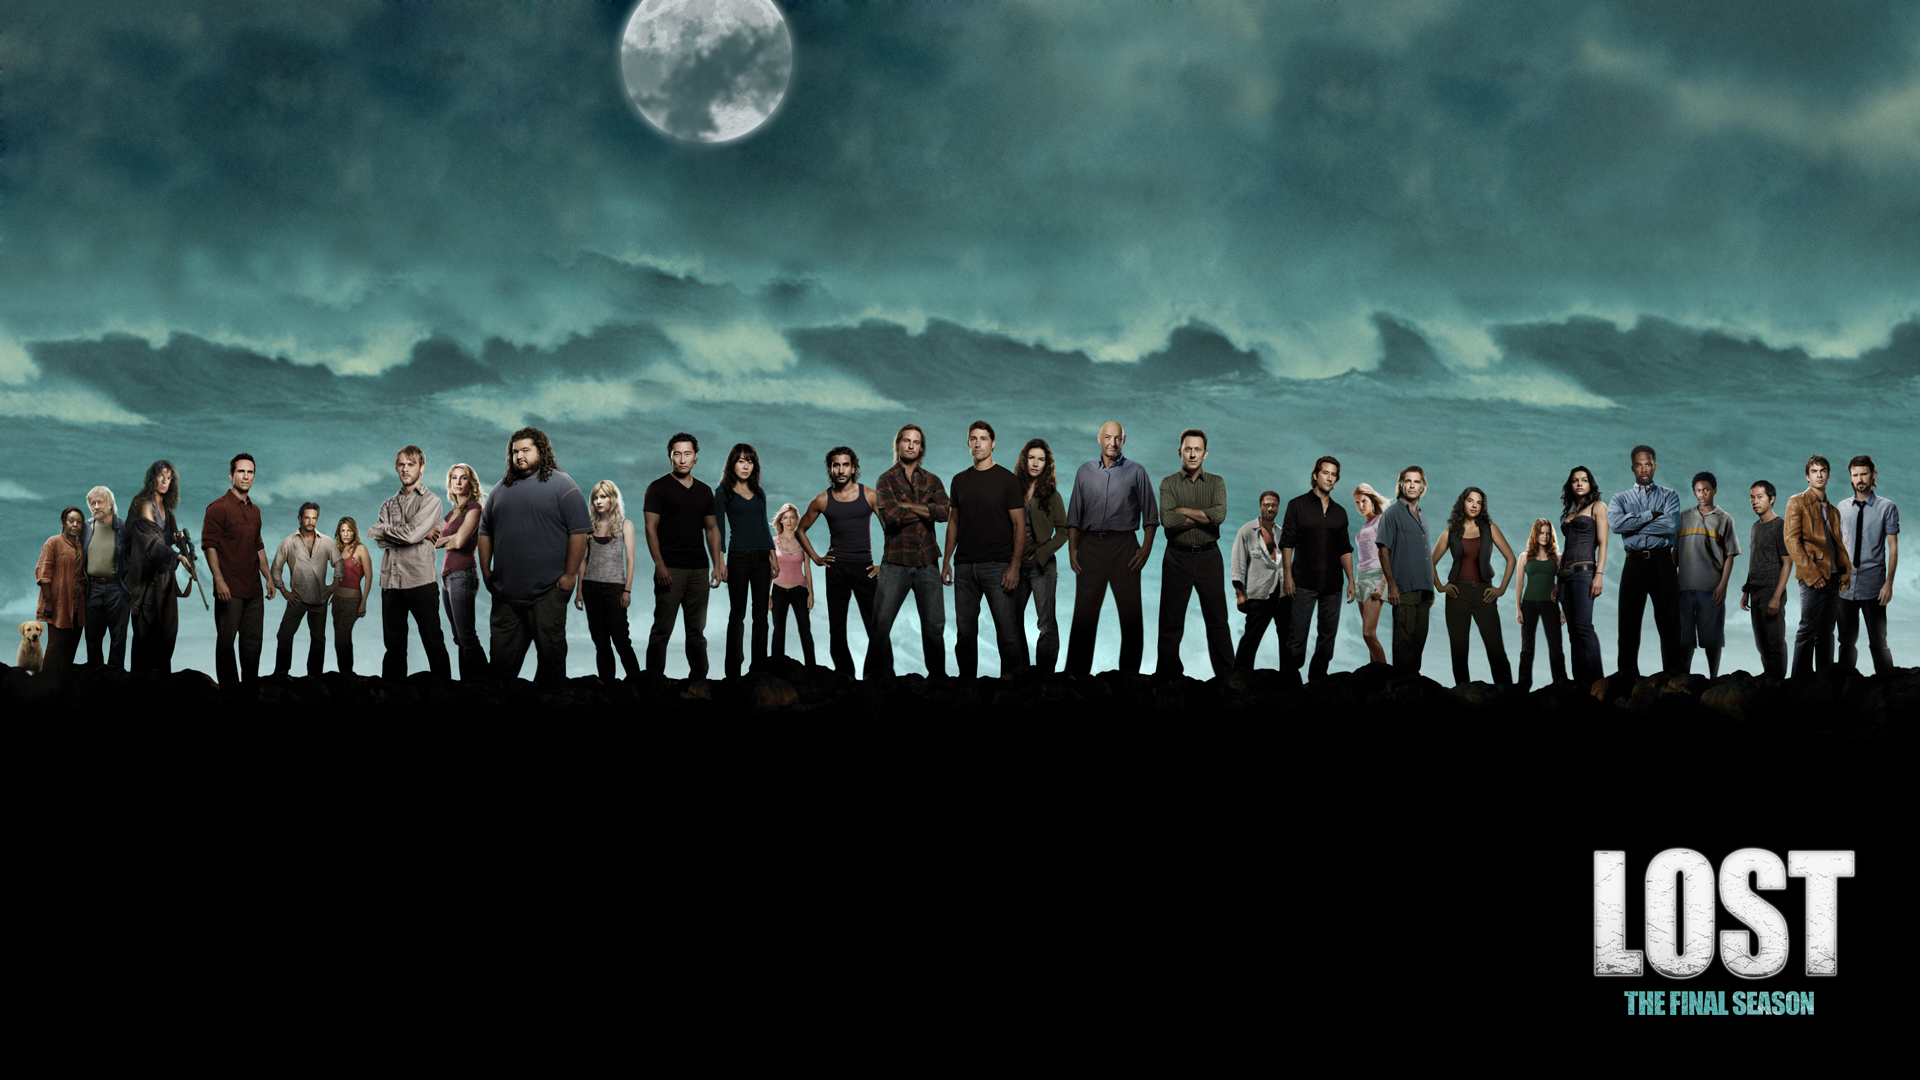 Lost_full_cast_with_text_by_wolverine080976